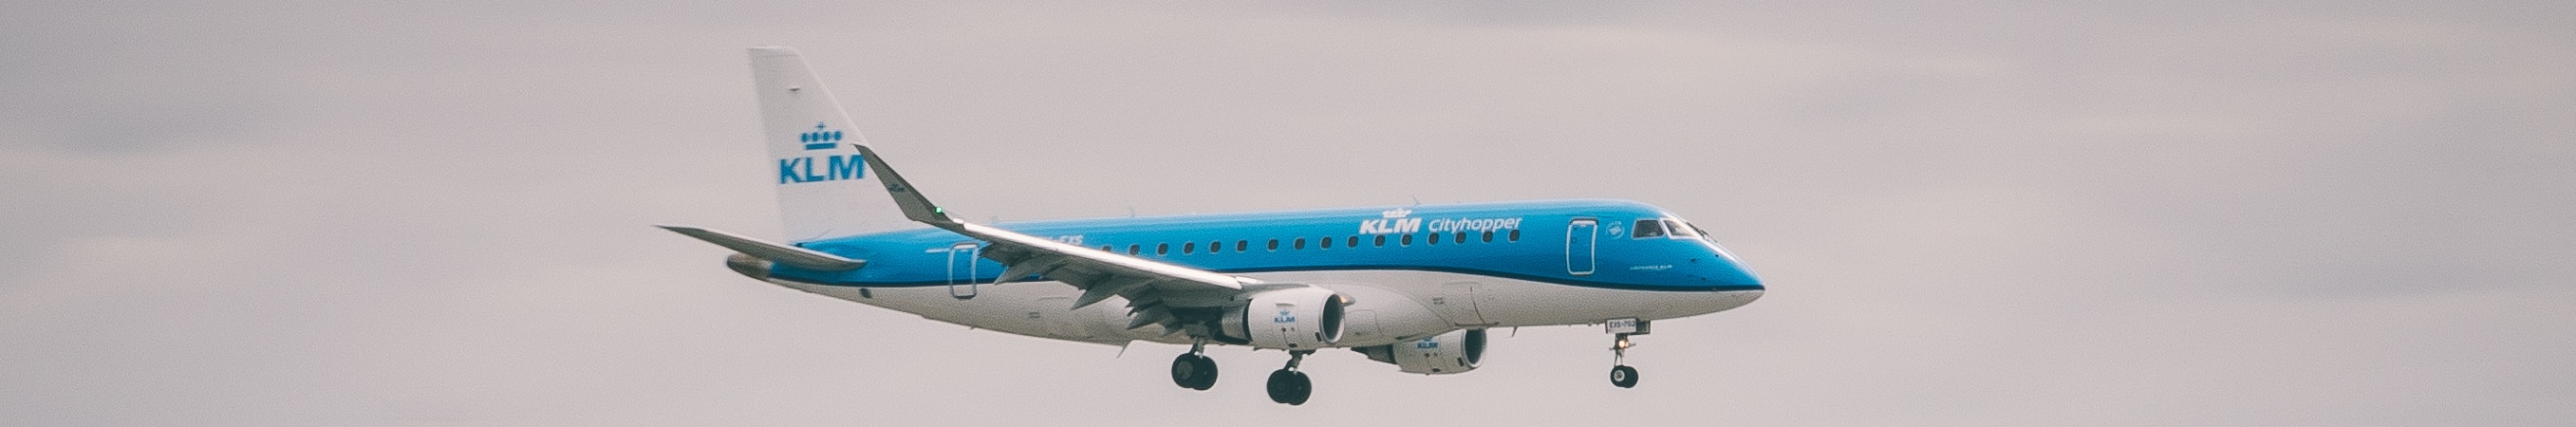 In 2021, Air France-KLM emitted 25 Mn tCO2e (Scope 1+2+3)